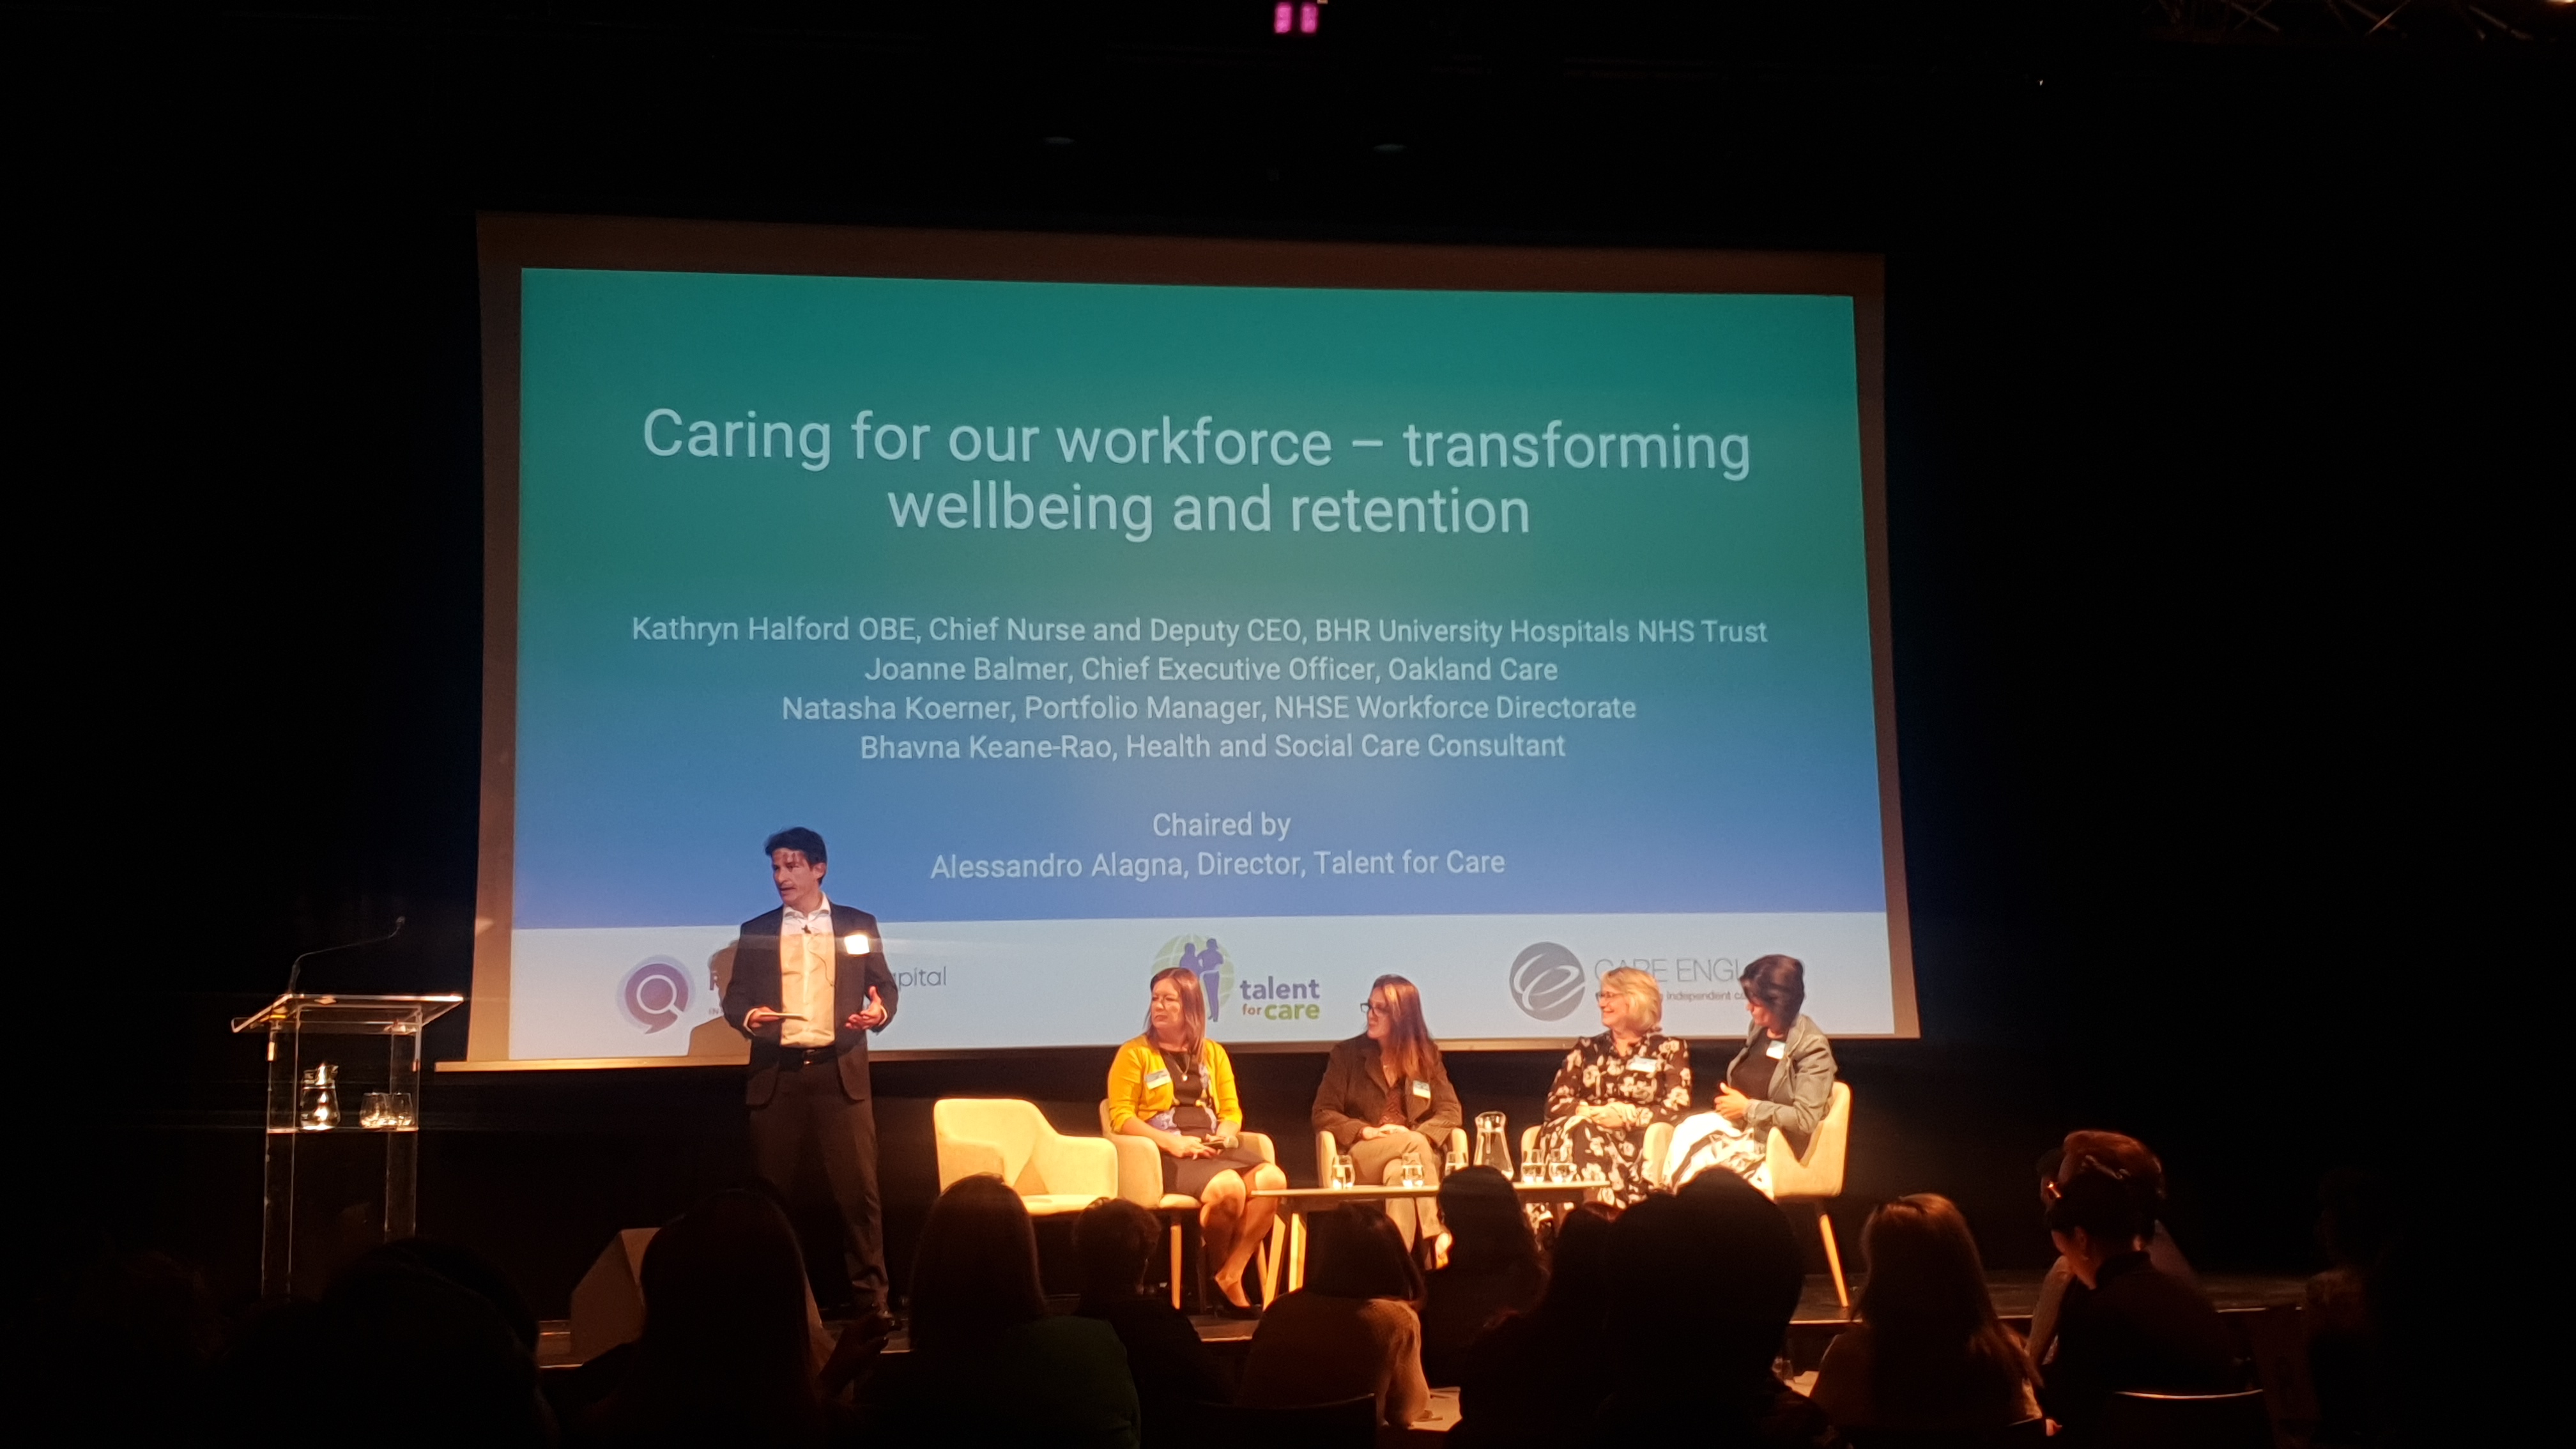 the event's panel on transforming workforce wellbeing and retention